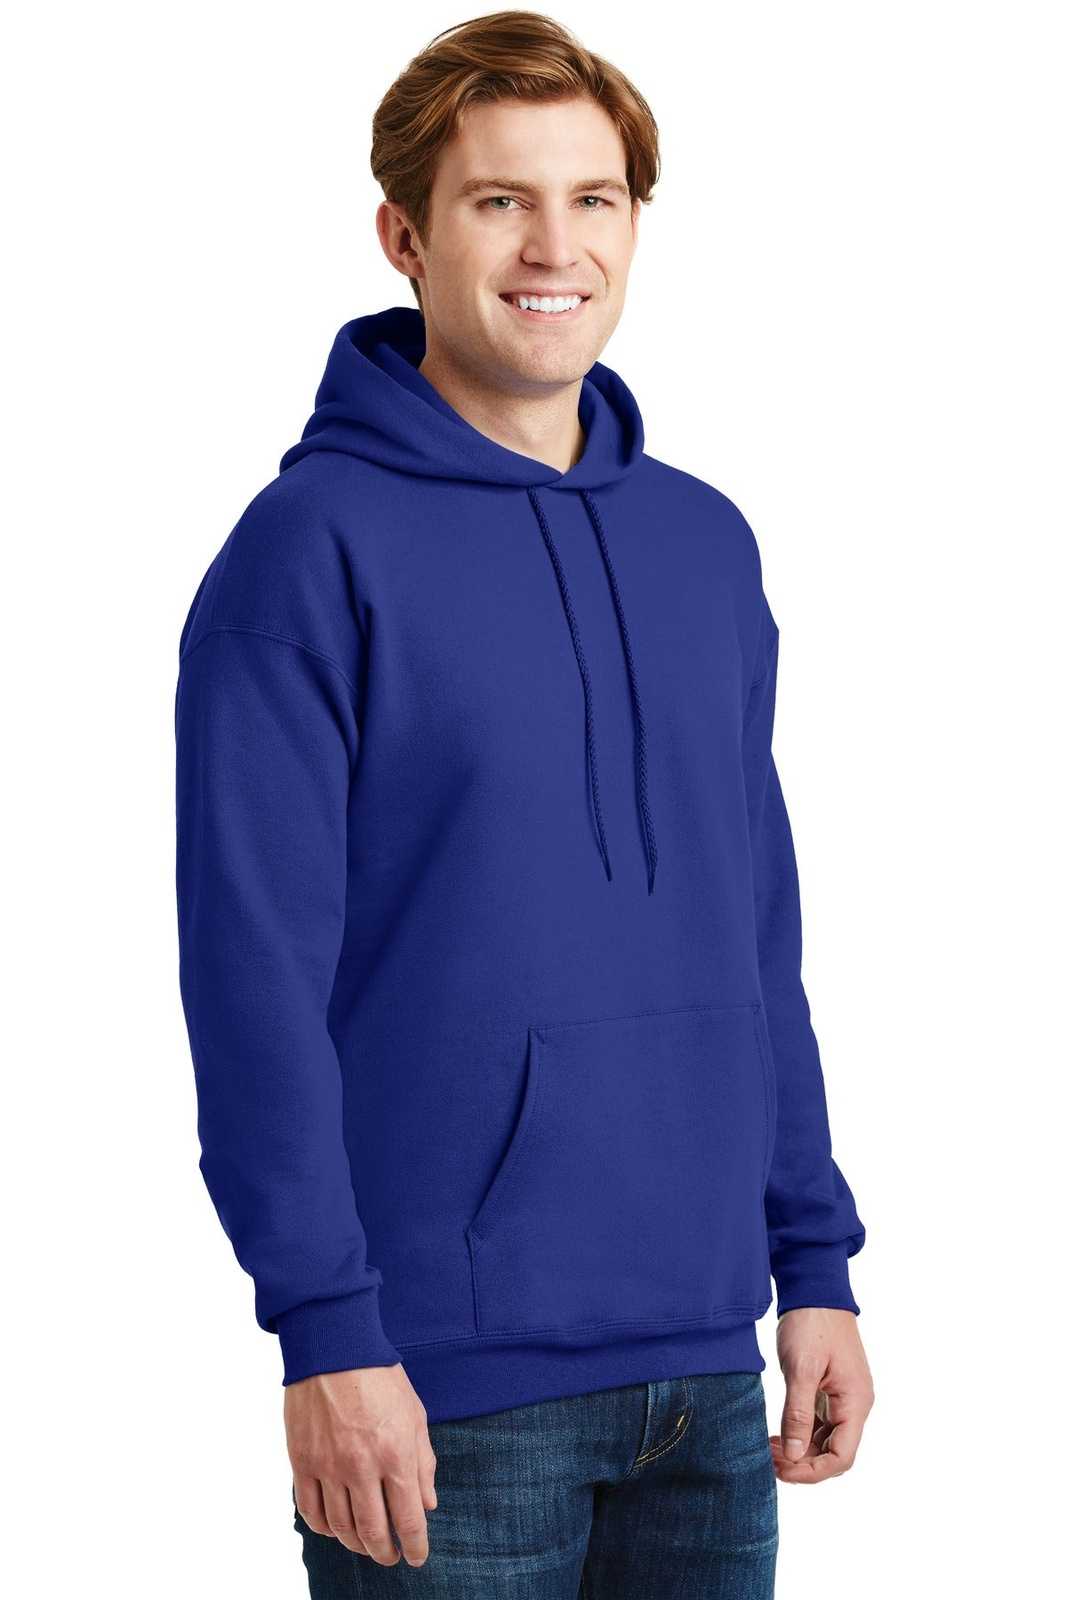 Hanes F170 Ultimate Cotton Pullover Hooded Sweatshirt - Deep Royal - HIT a Double